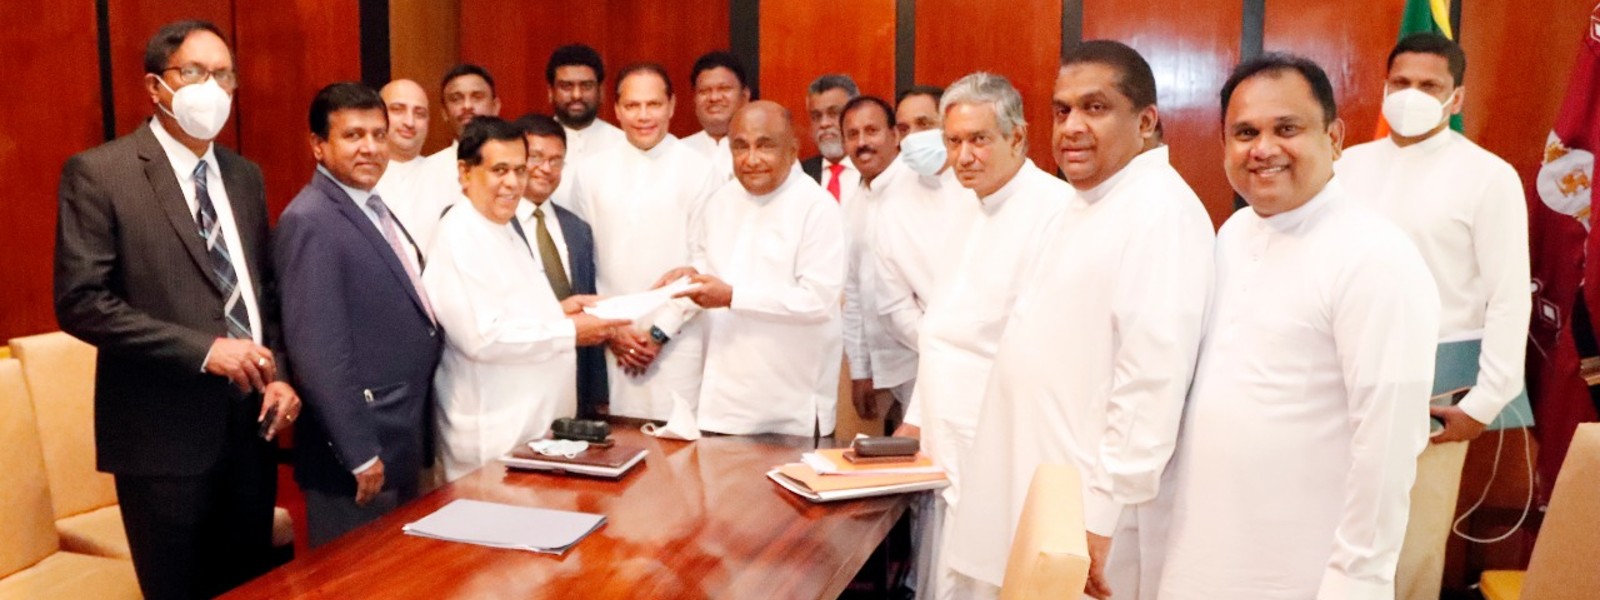 21st Amendment : SLFP, Group of 10, SLPP Independents submit their draft to speaker